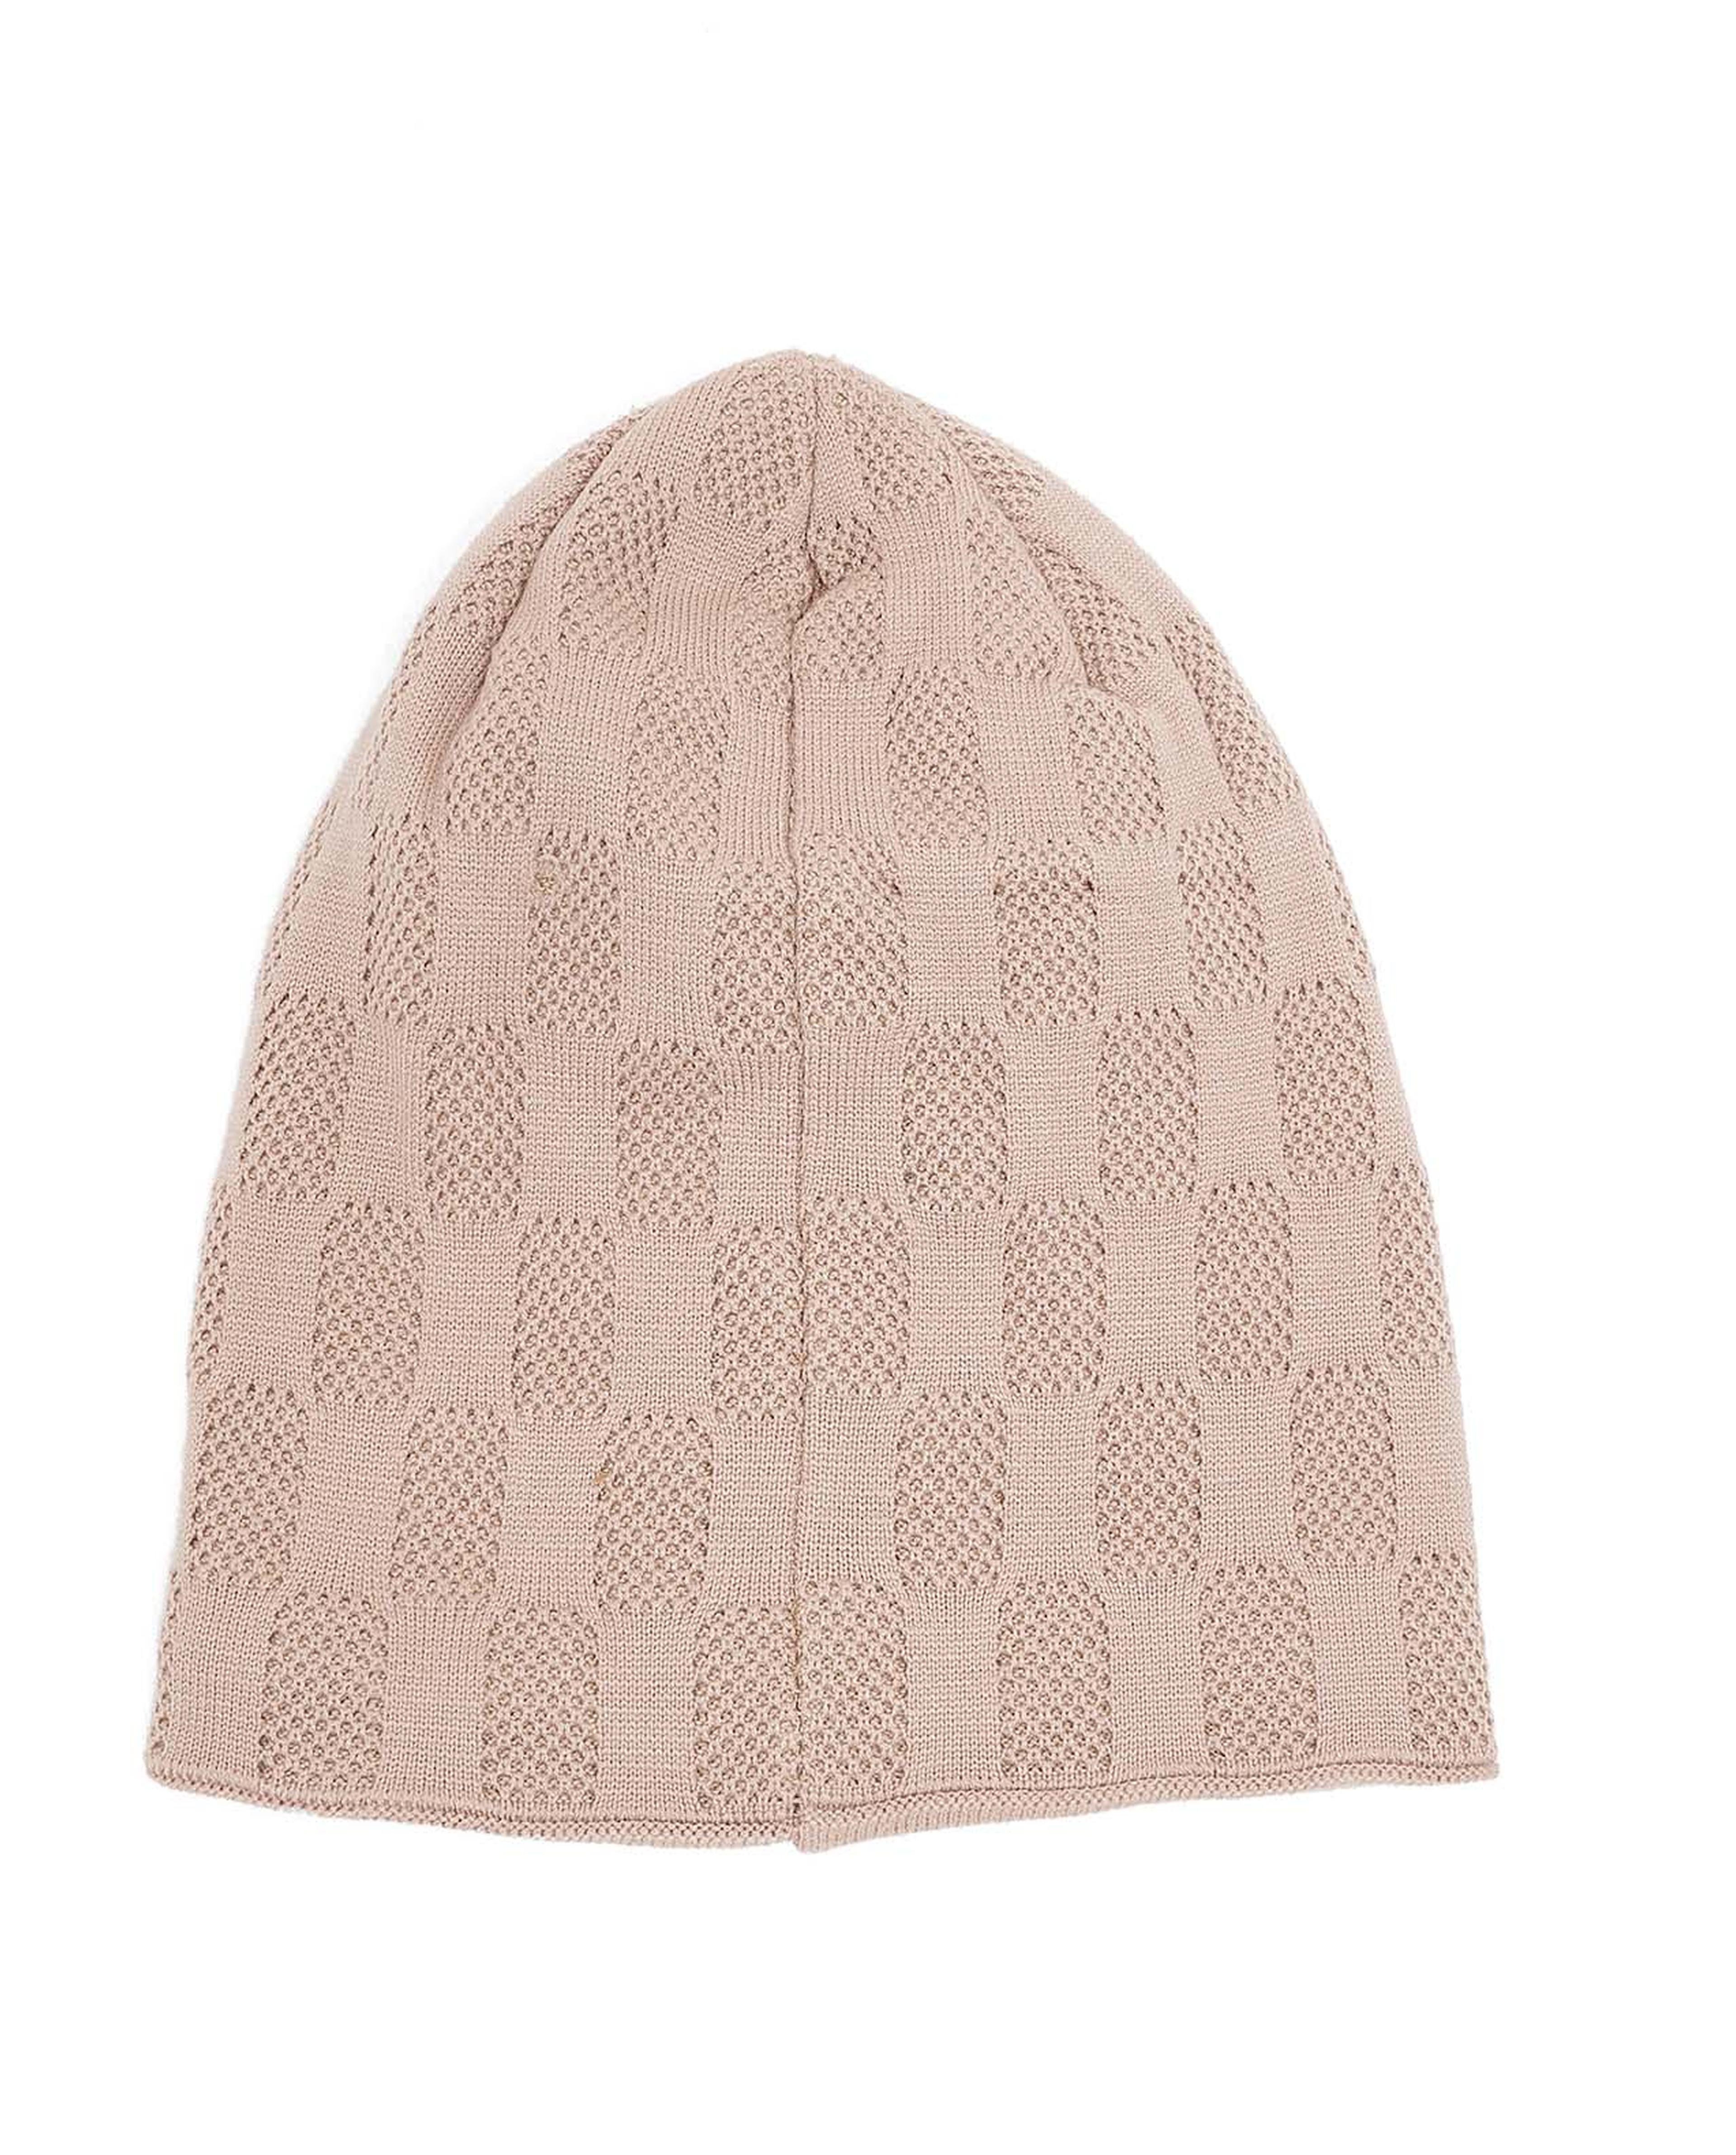 Self Patterned Beanie